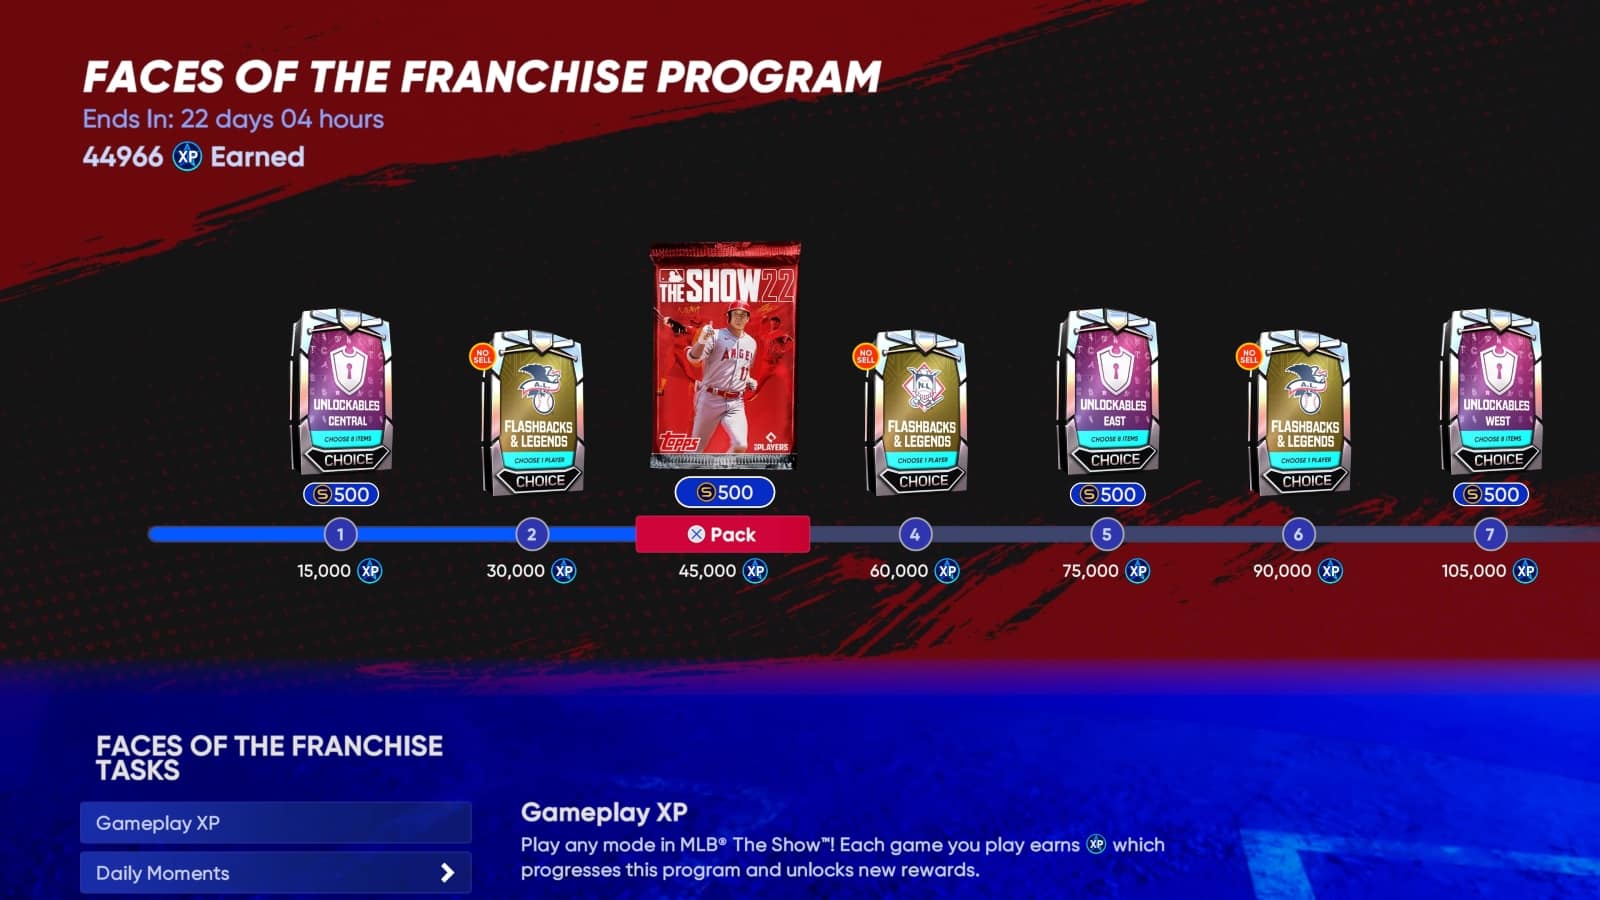 MLB The Show 22 Face of the Franchise rewards